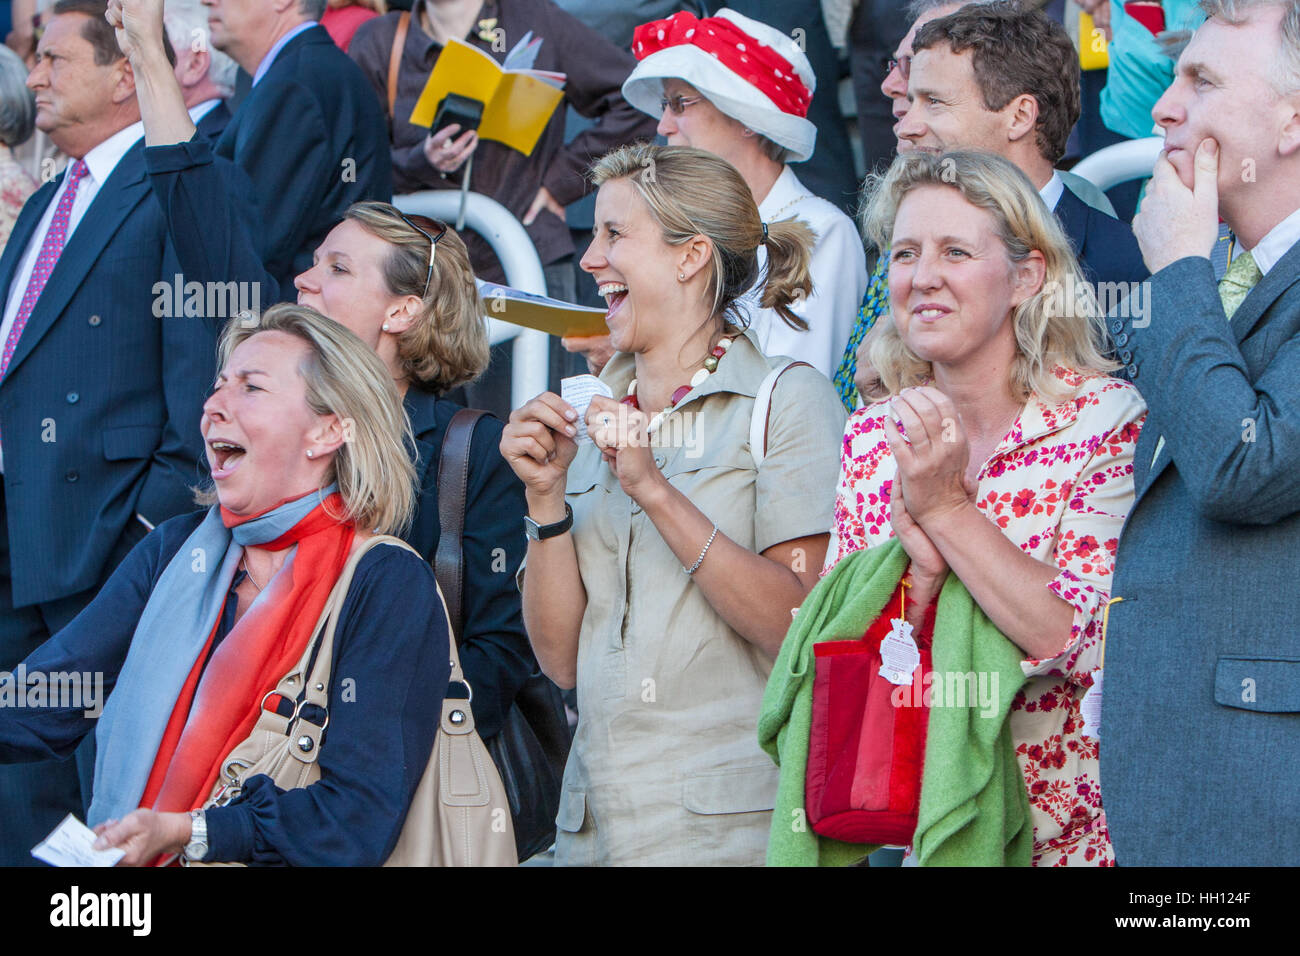 Spectators at Goodwood cheering on a horse race Stock Photo